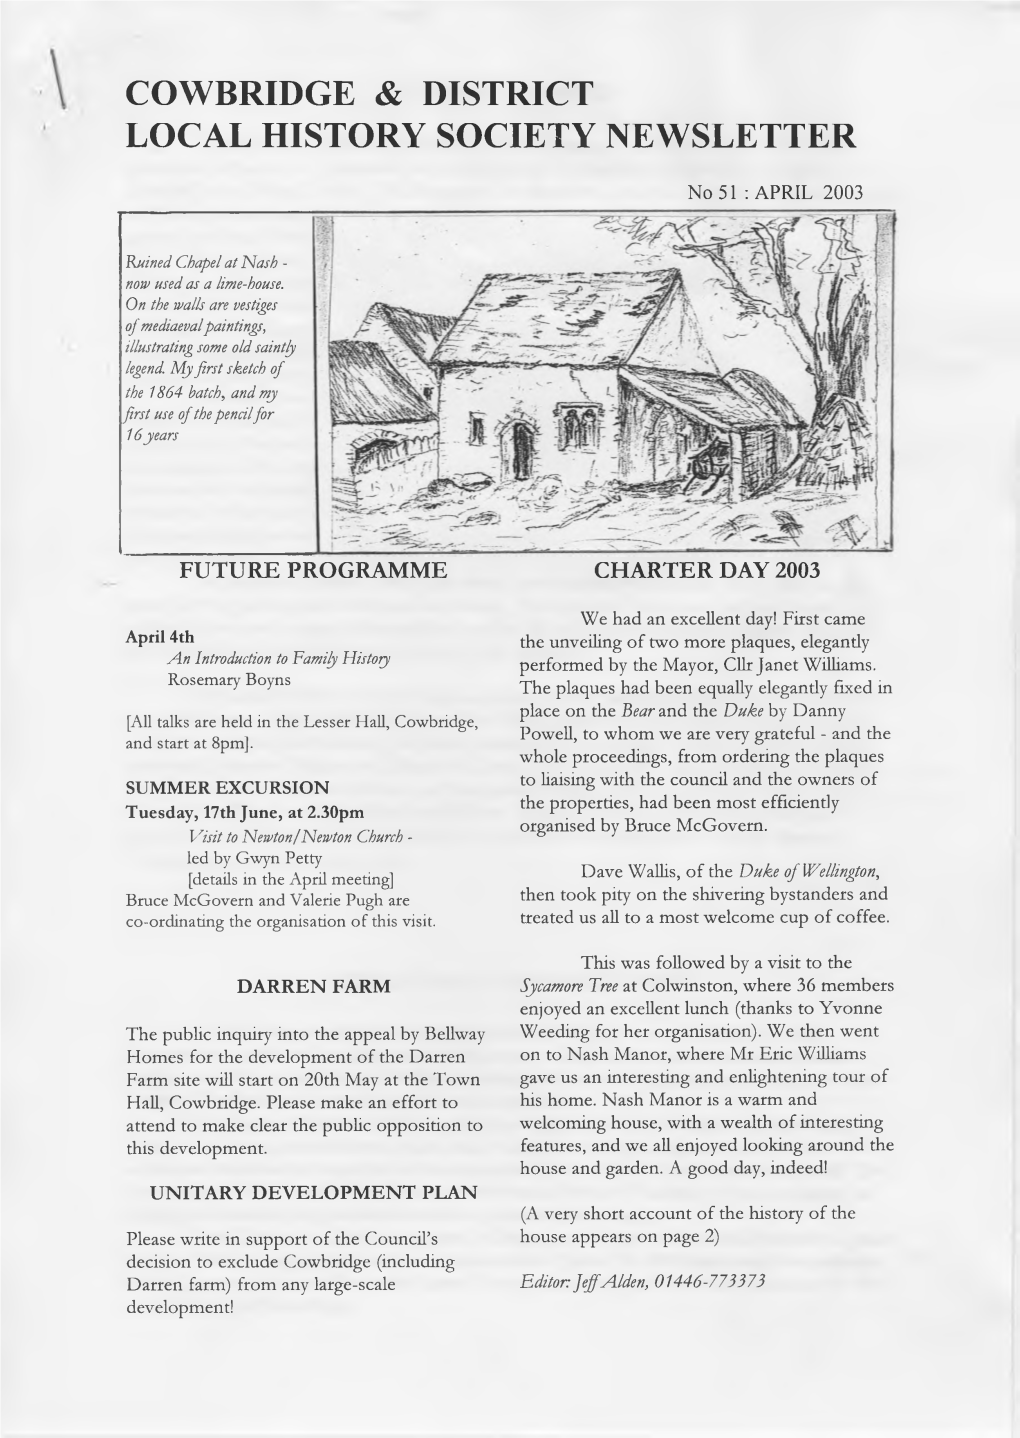 Cowbridge & District Local History Society Newsletter